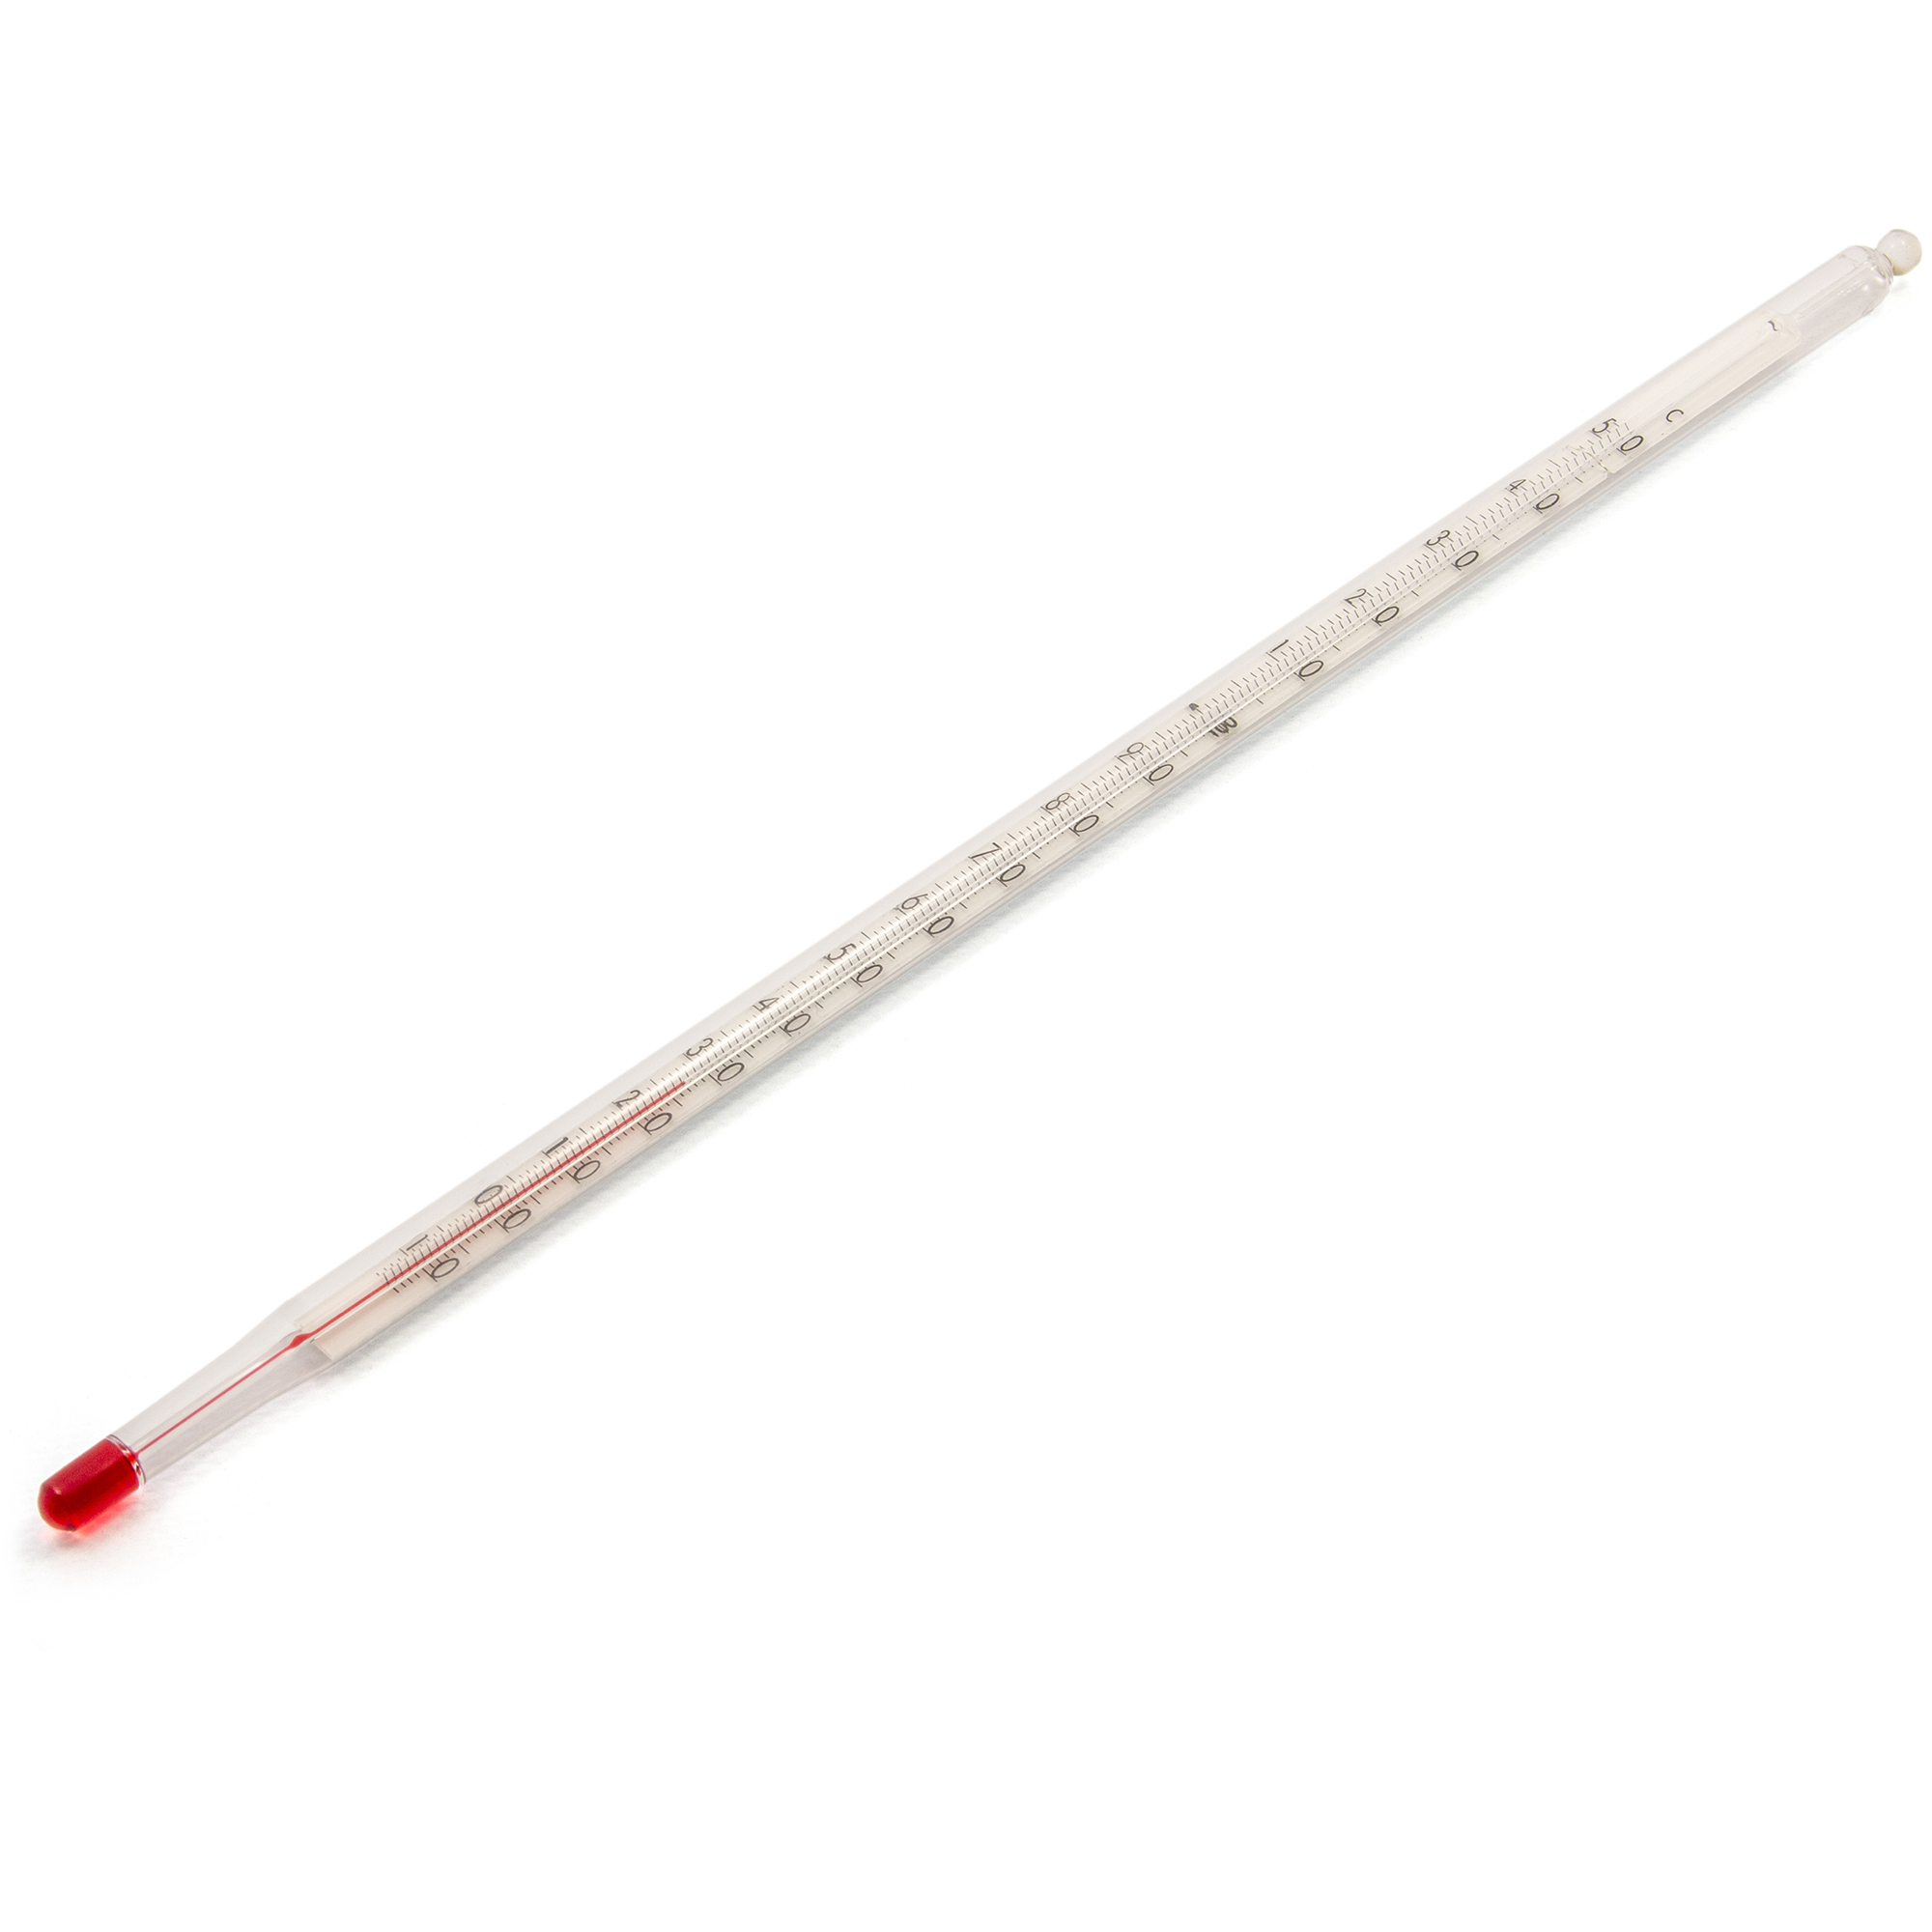 ABMD 1220644001 Precision thermometer glass with certificate -10/+50°C